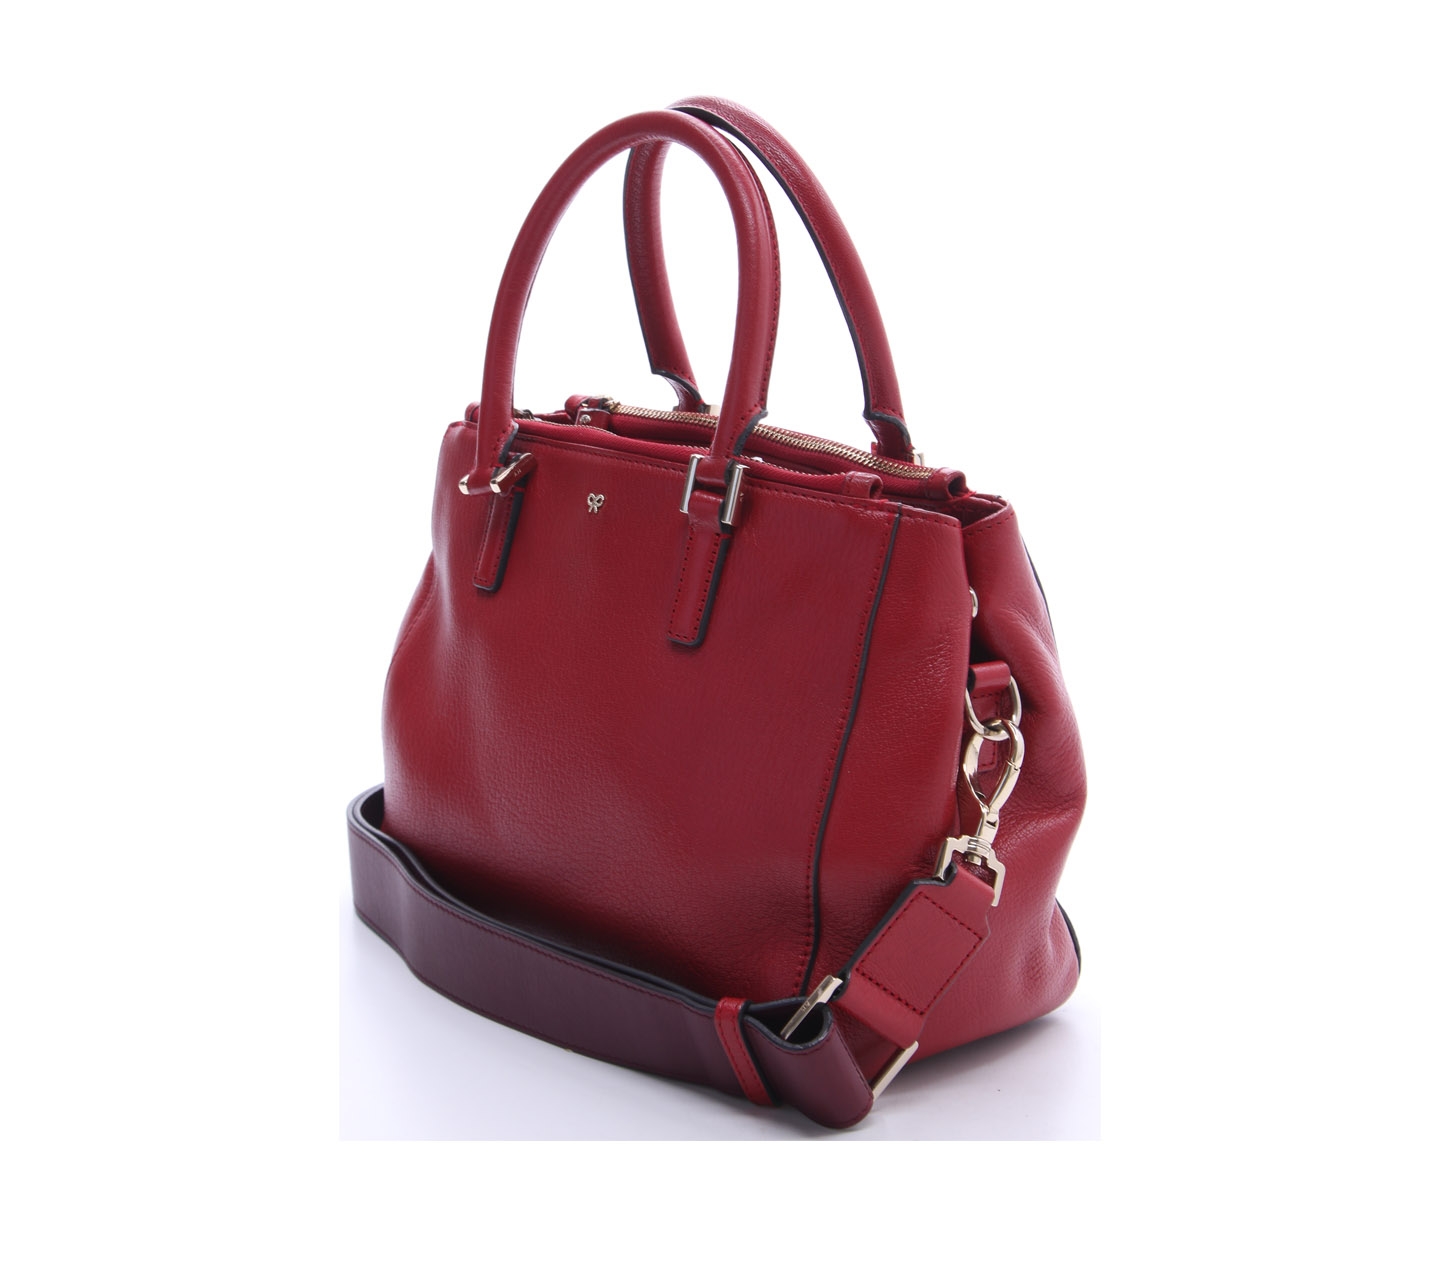 Anya Hindmarch Red Leather Double Zipper Satchel